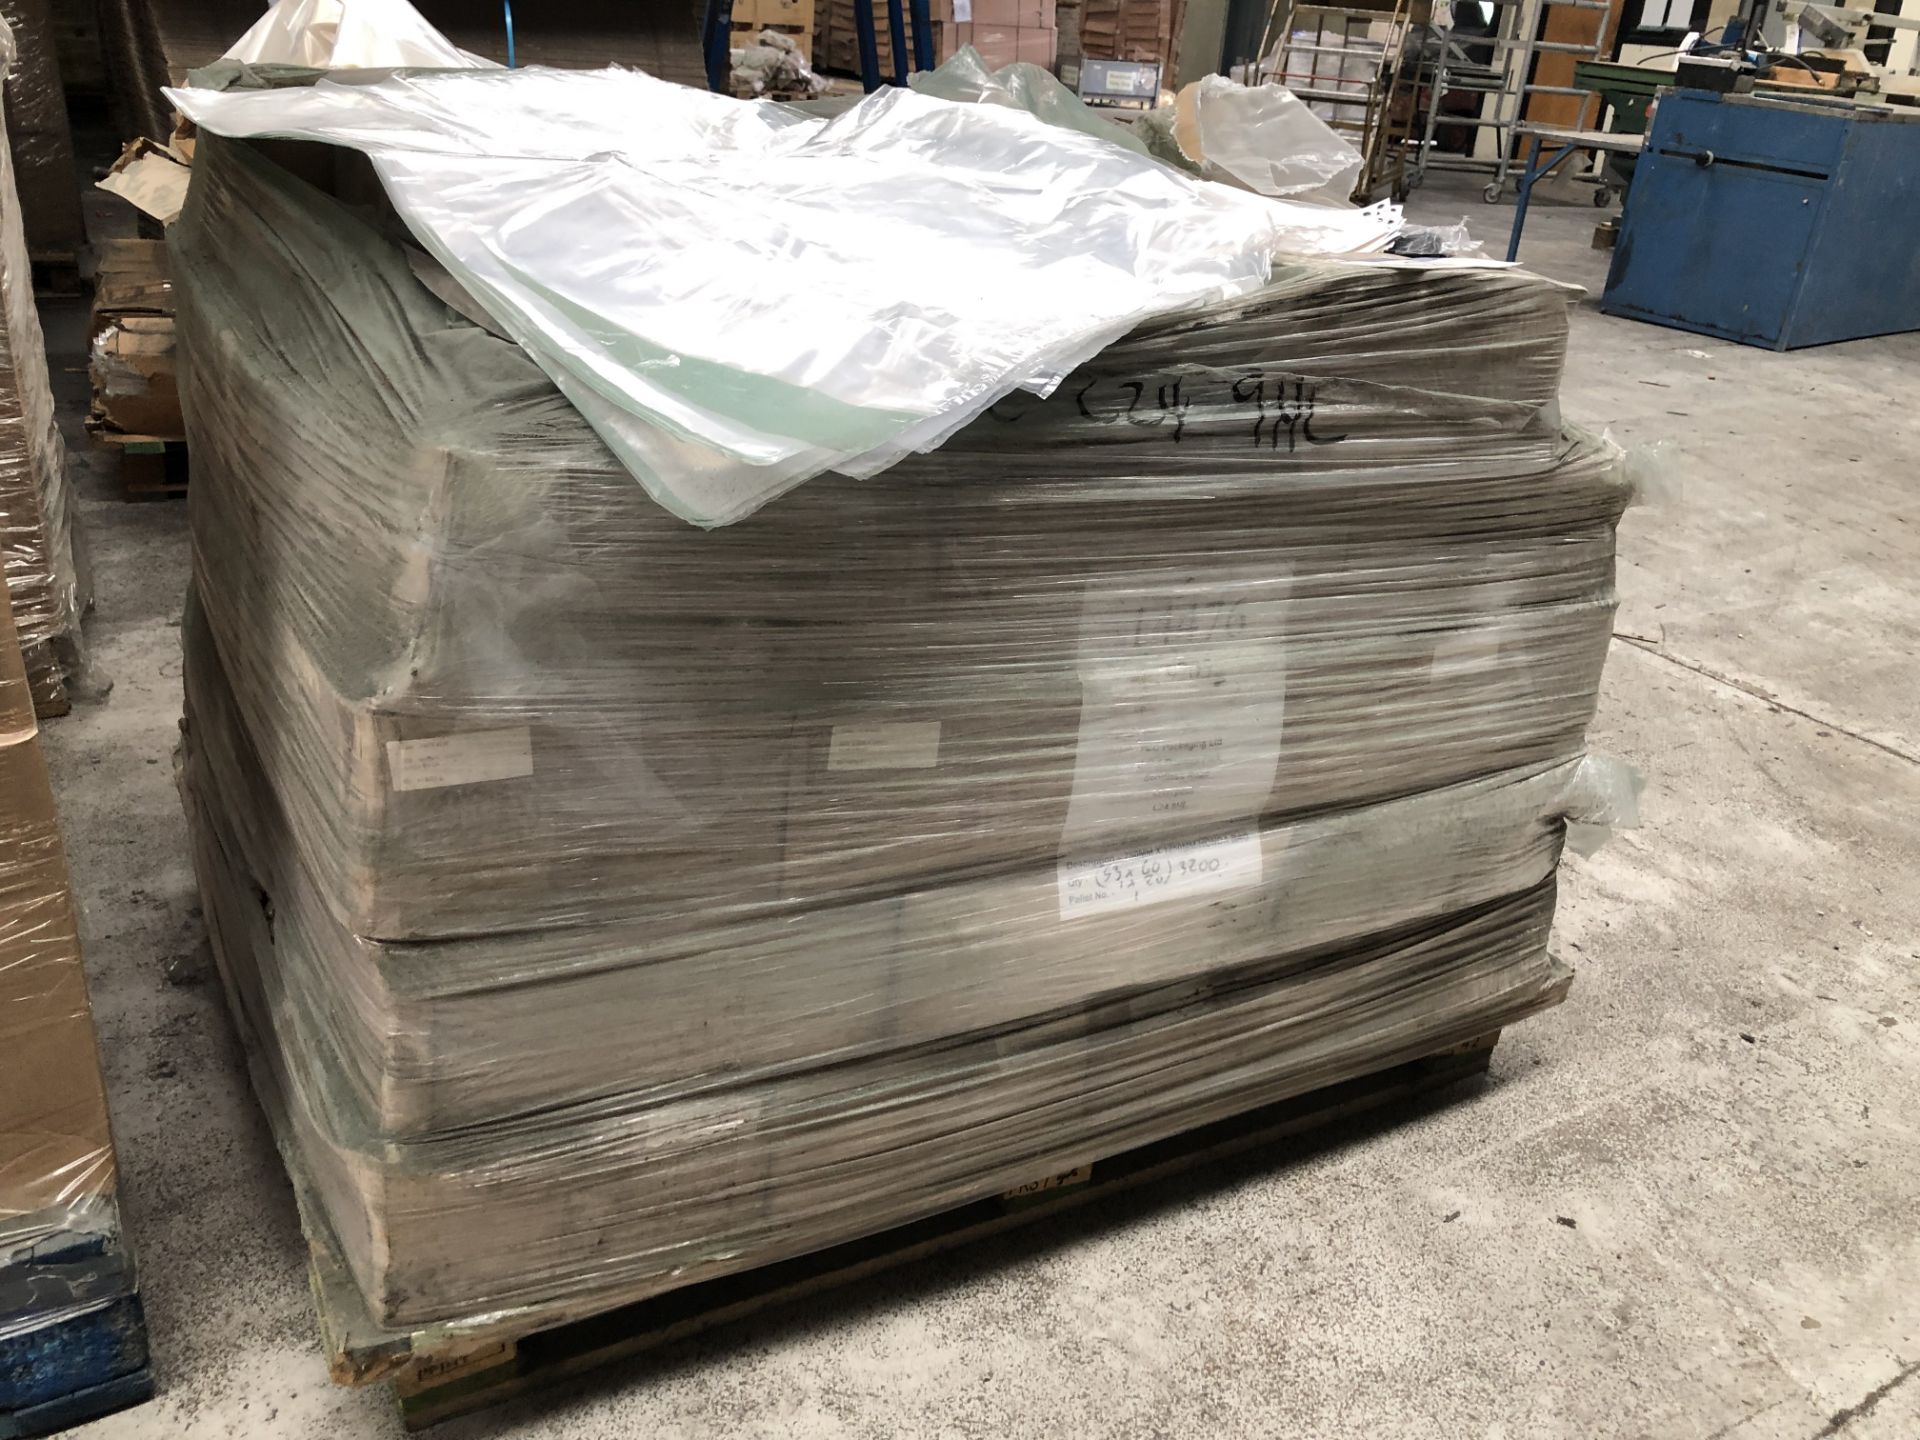 Approx. ½ Pallet of Polythene Bags, 750mm x 1250mm